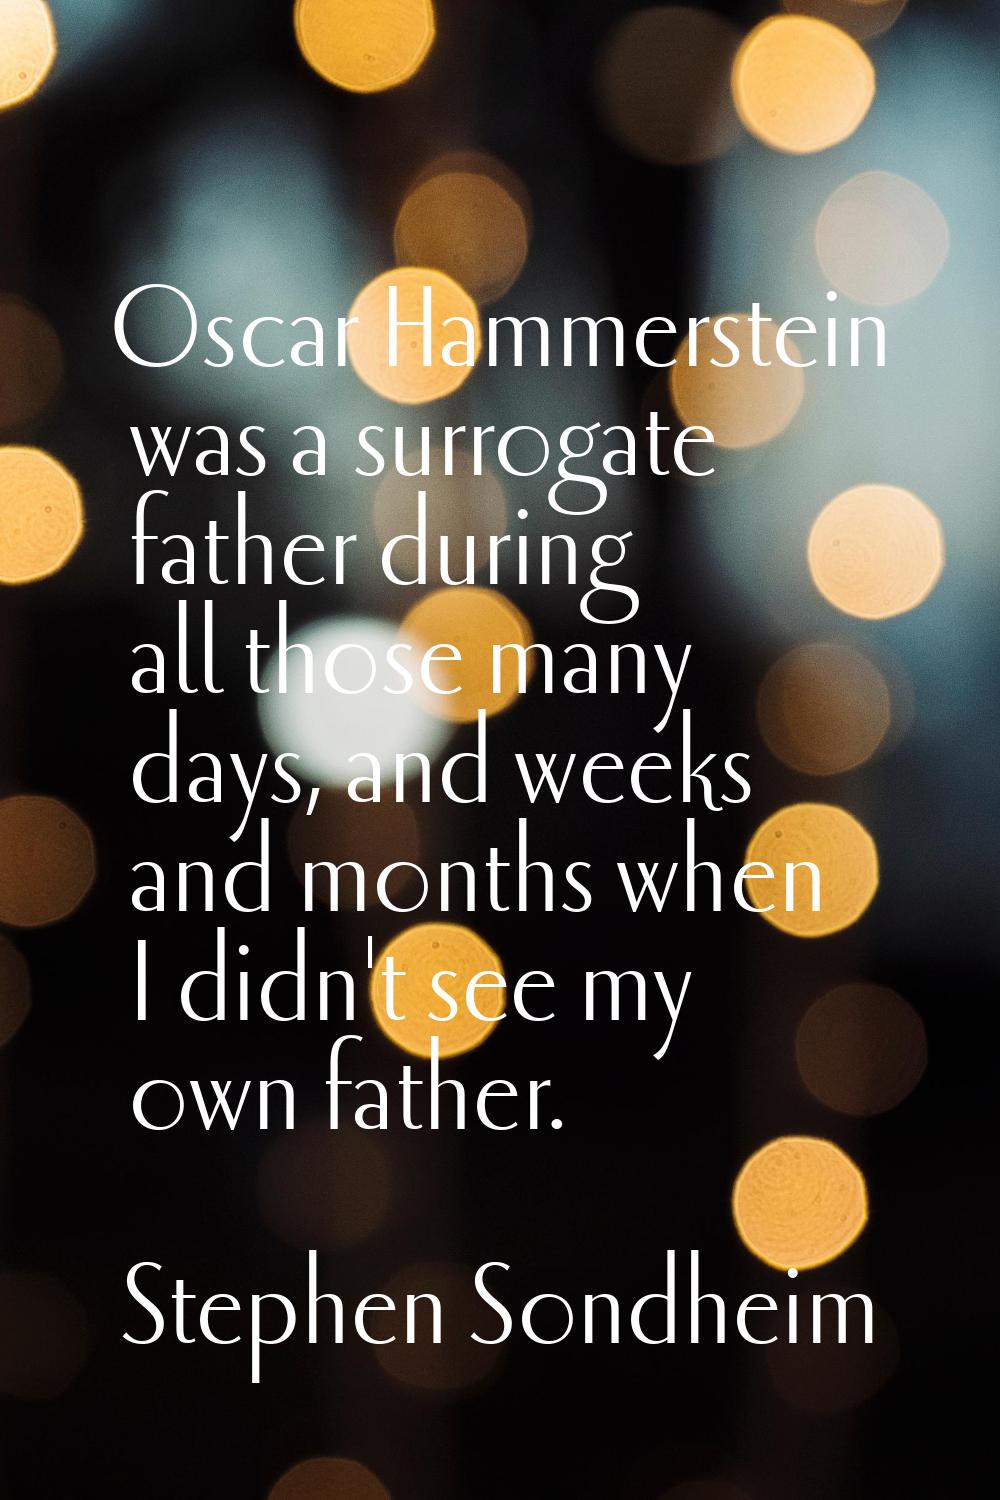 Oscar Hammerstein was a surrogate father during all those many days, and weeks and months when I di